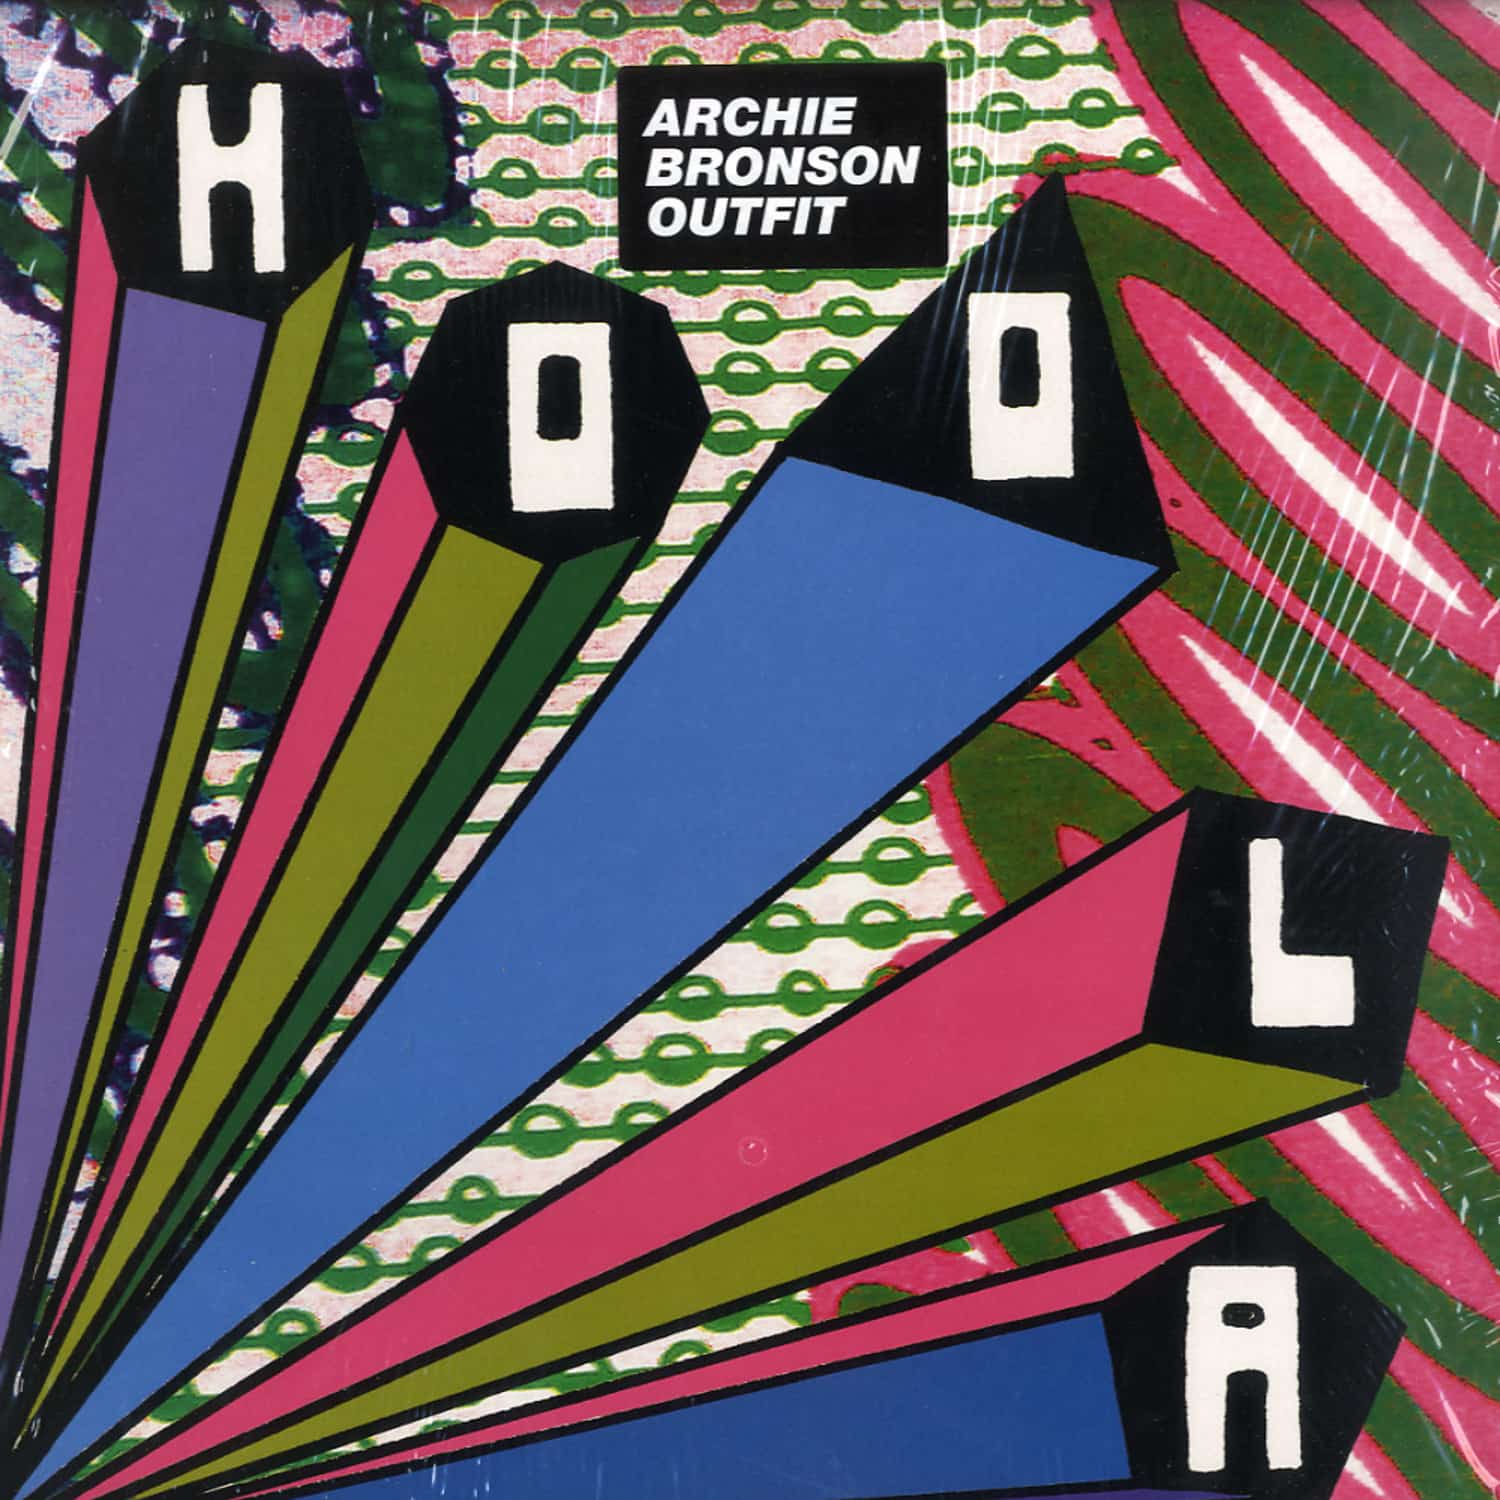 Archie Bronson Outfit - HOOLA / MOSCOW & HOUSE OF DAVID REMIX